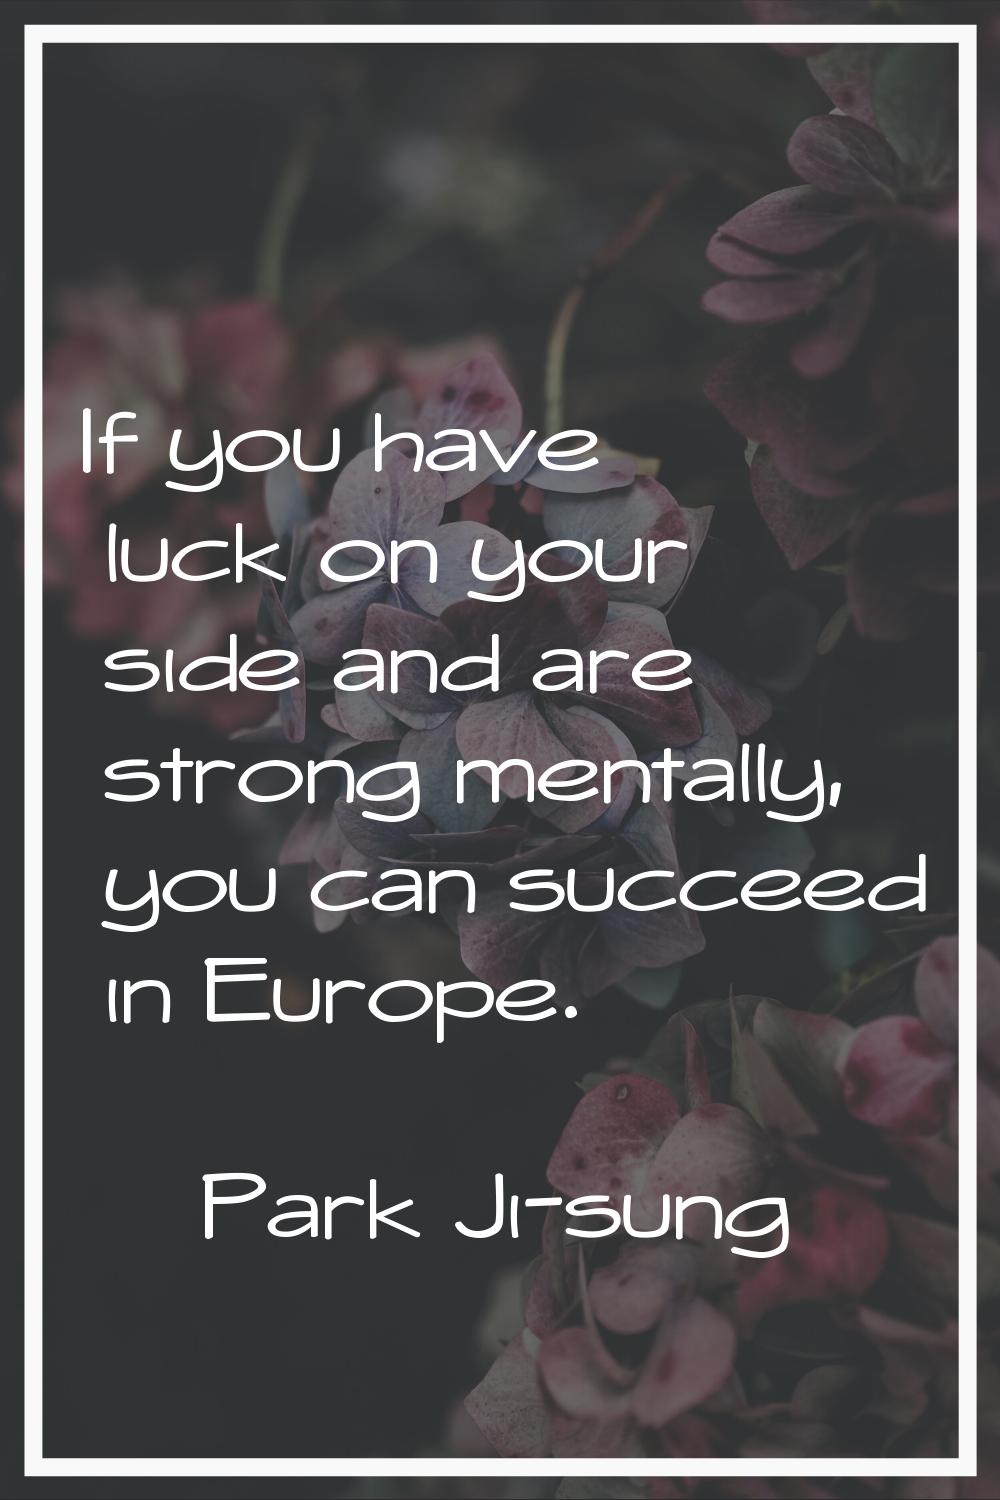 If you have luck on your side and are strong mentally, you can succeed in Europe.